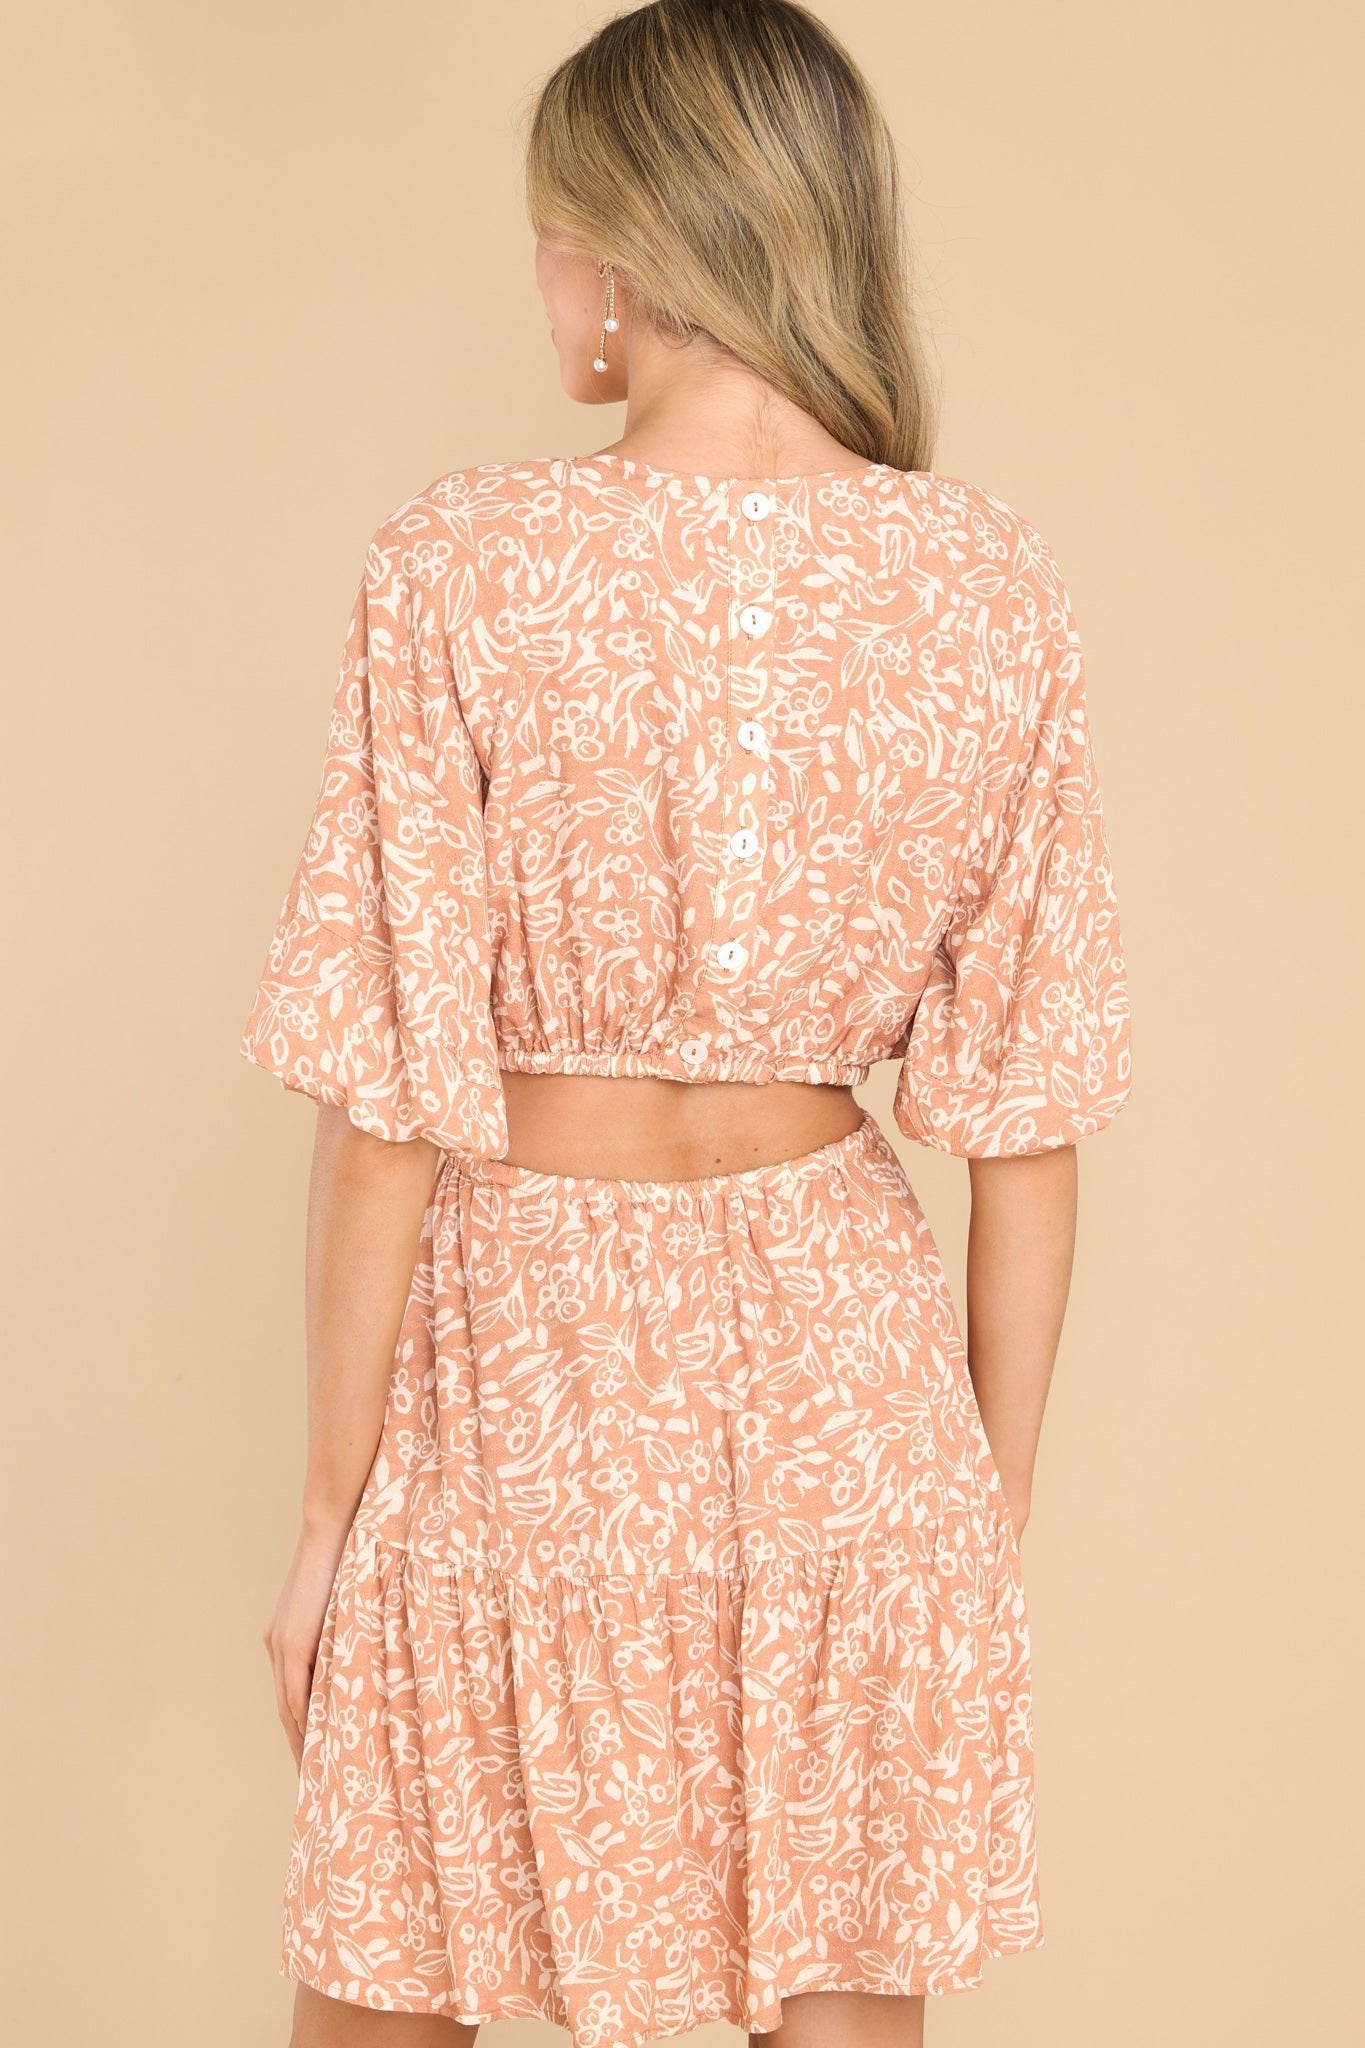 Back view of this dress that features a round neckline, functional buttons down the back, puff sleeves with elastic cuffs, a cutout around the waist with two elastic bands, and a flowy skirt.